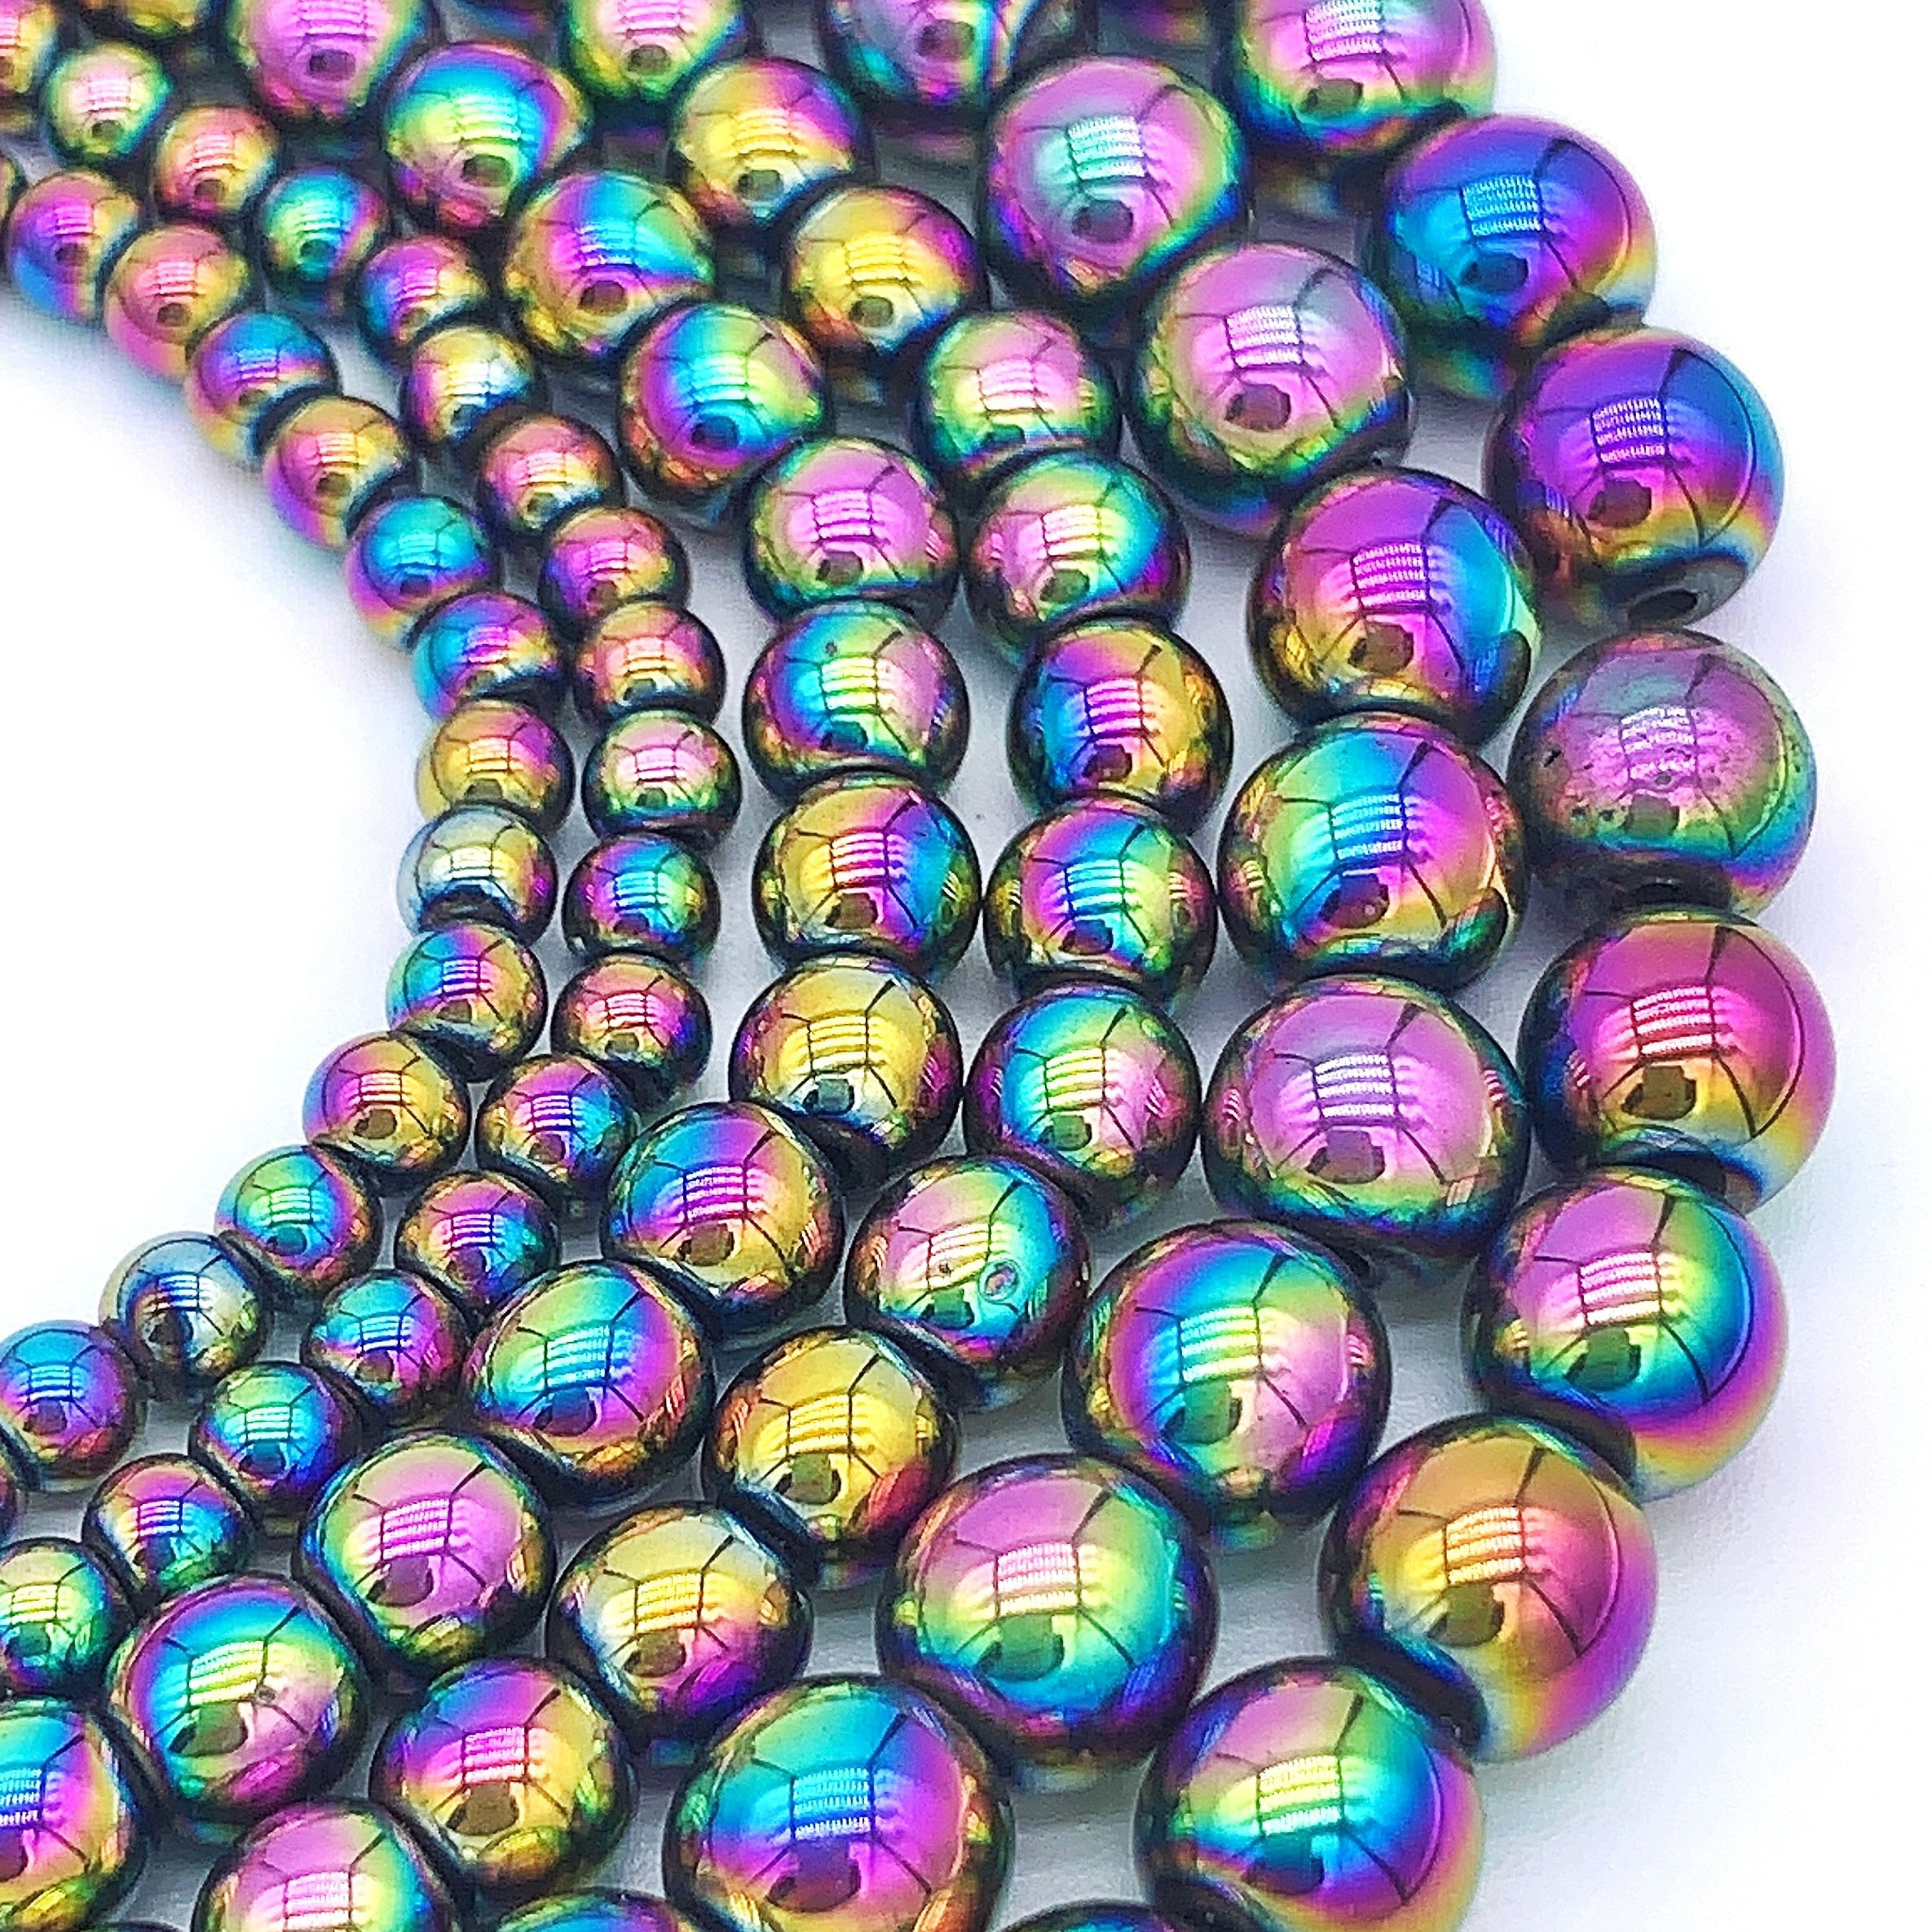 Teekos WLYeeS Nano Colorful Round Bead Plating Natural Hematite Spacer  Loose Beads for Jewelry Bracelet Necklace Making DIY 2 3 4 6 8mm - (Color